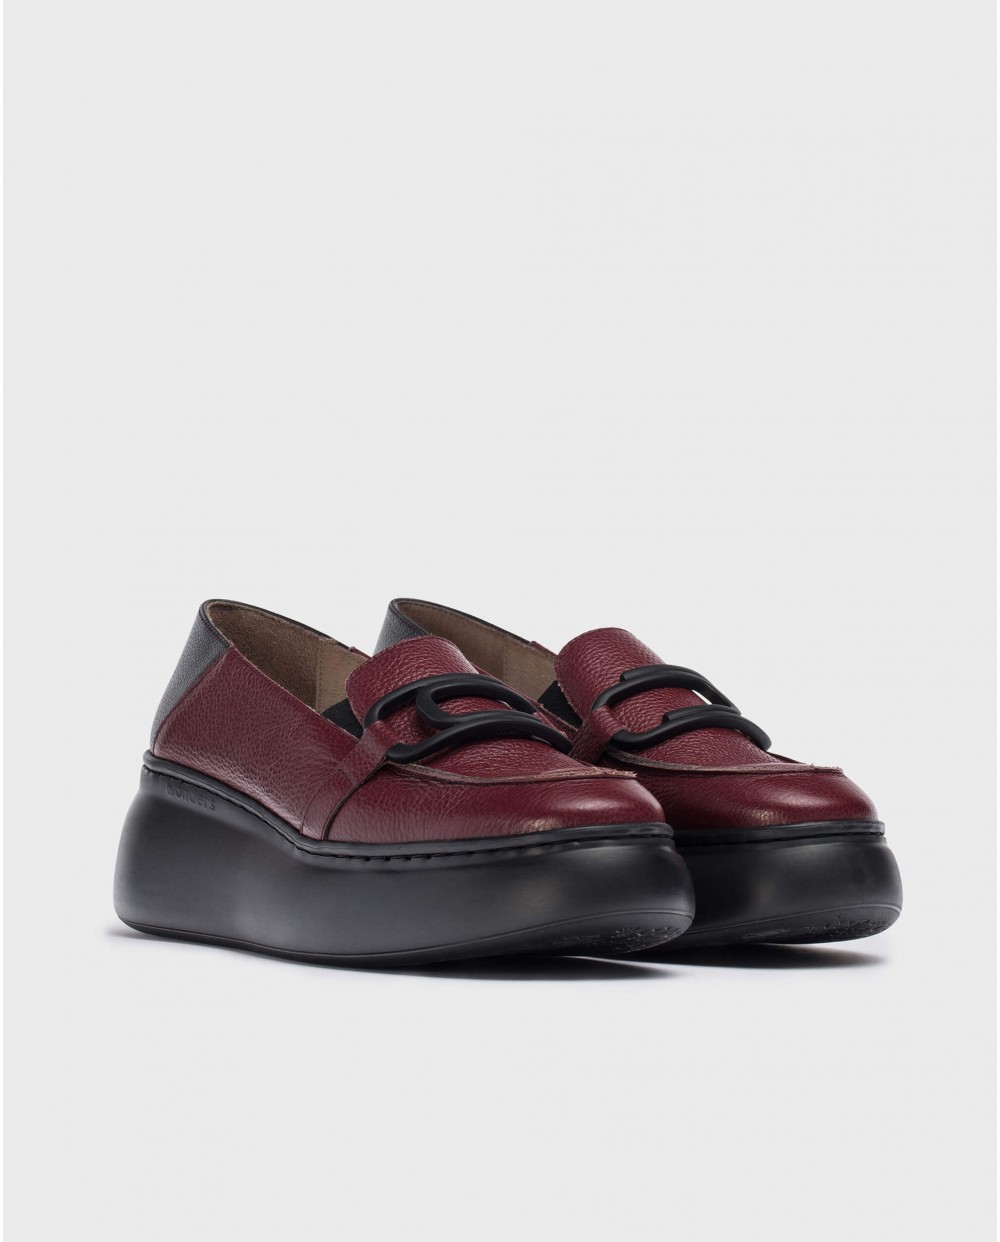 Wonders-Women shoes-Burgundy Nora loafers